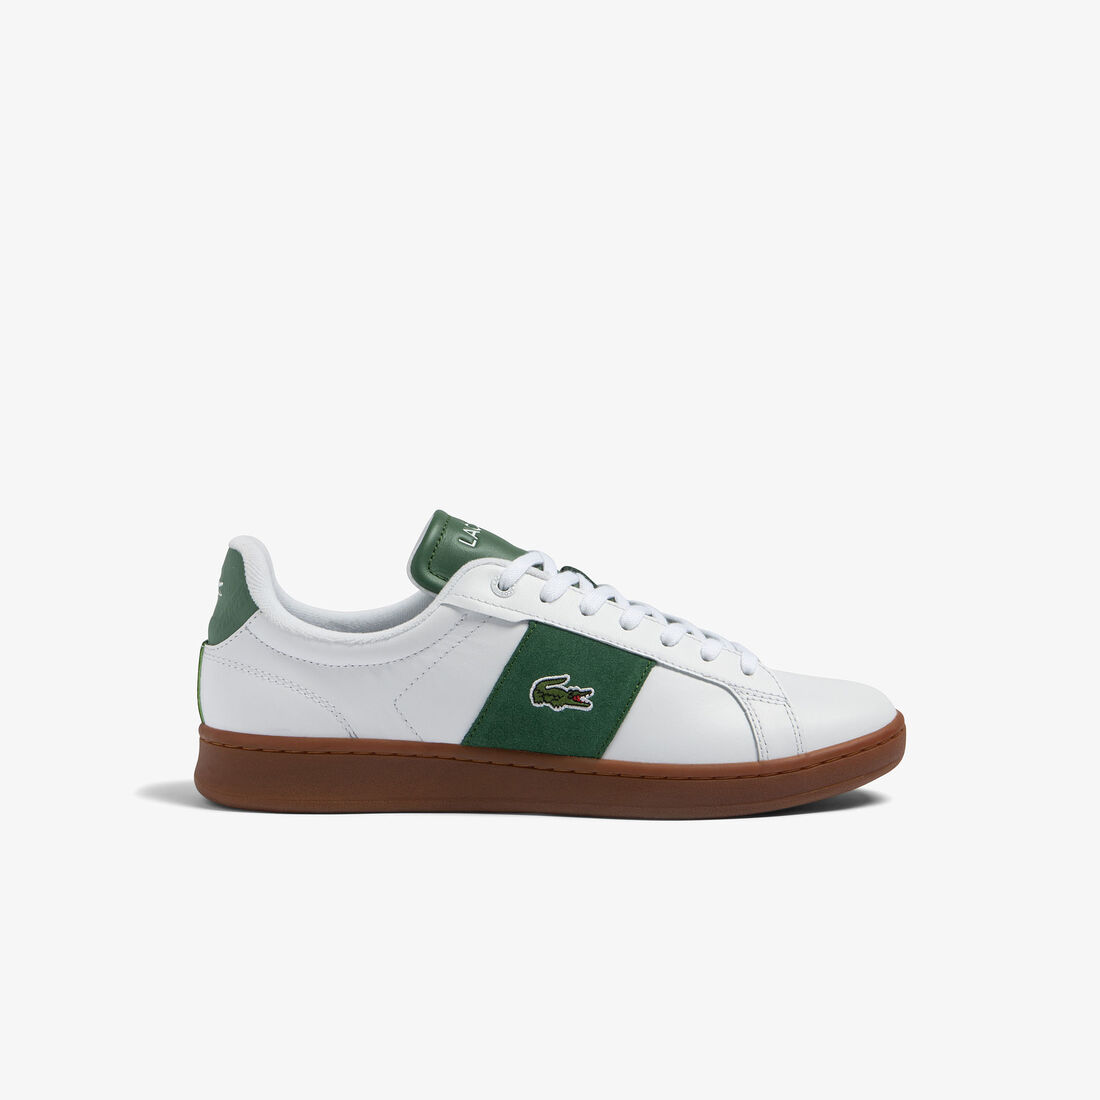 Men's Lacoste Carnaby Pro Leather Colour Pop Trainers